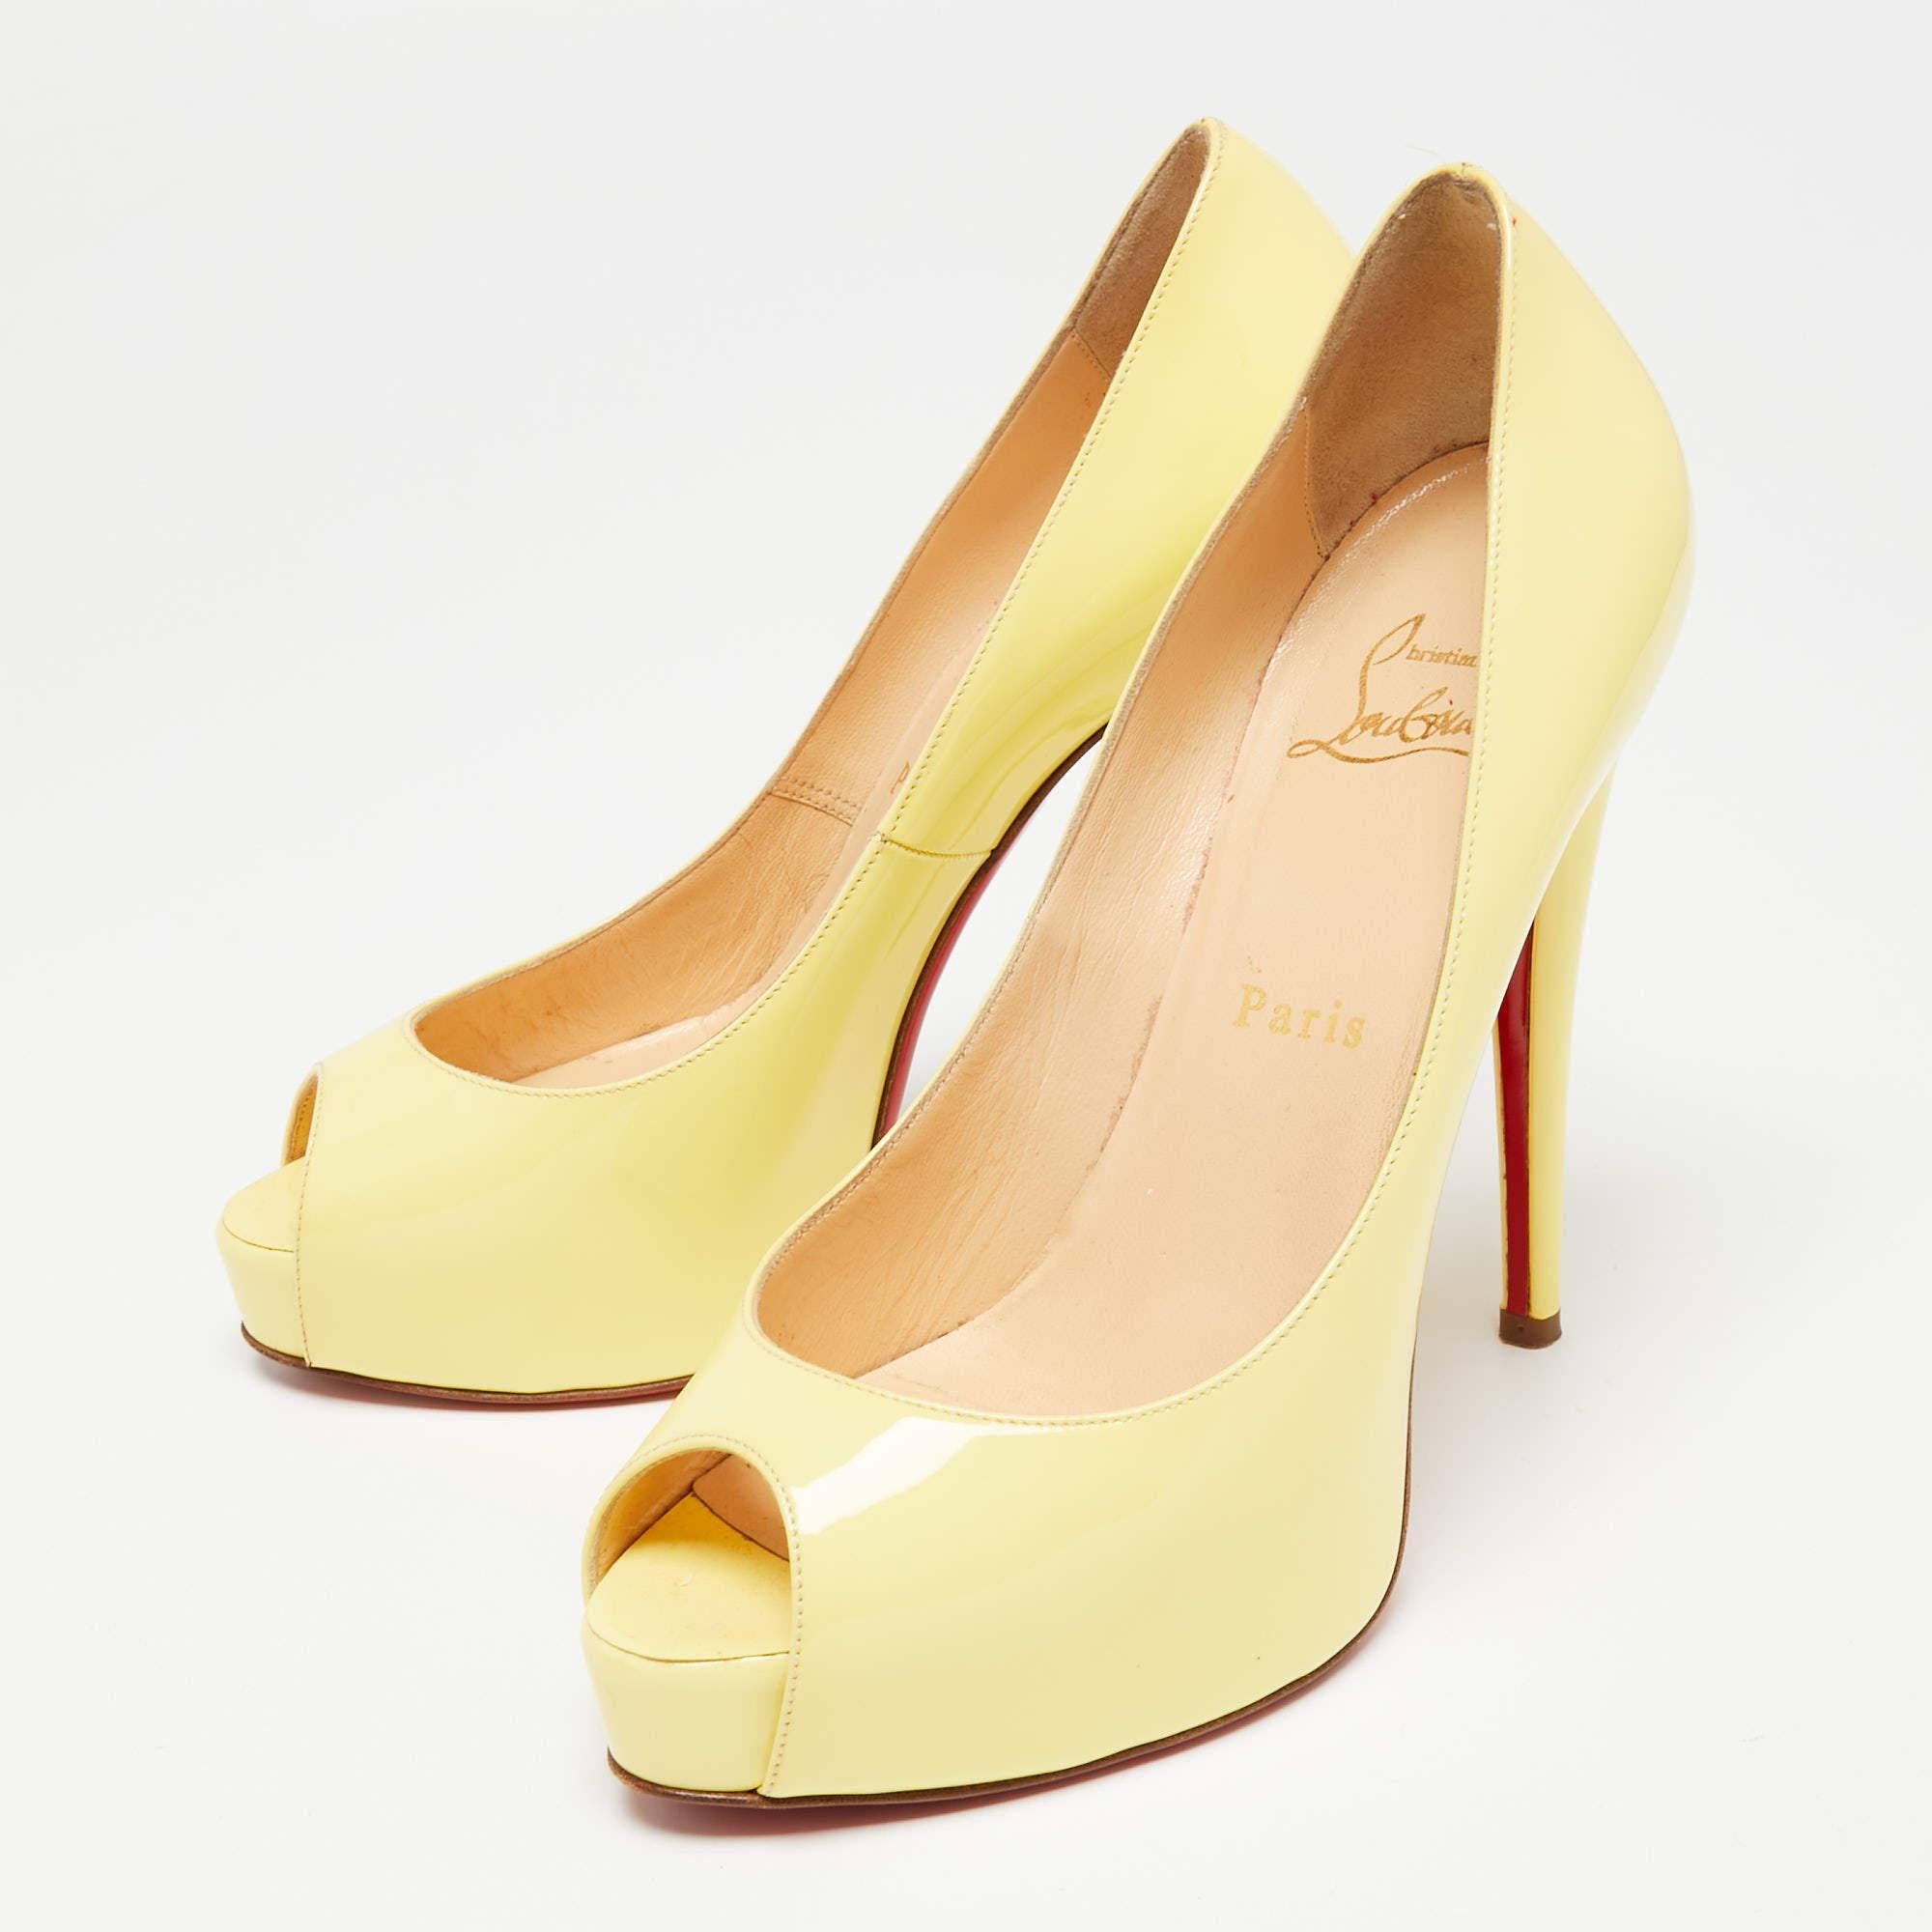 Christian Louboutin Yellow Patent Leather Very Prive Peep Toe Platform Pumps Siz For Sale 1